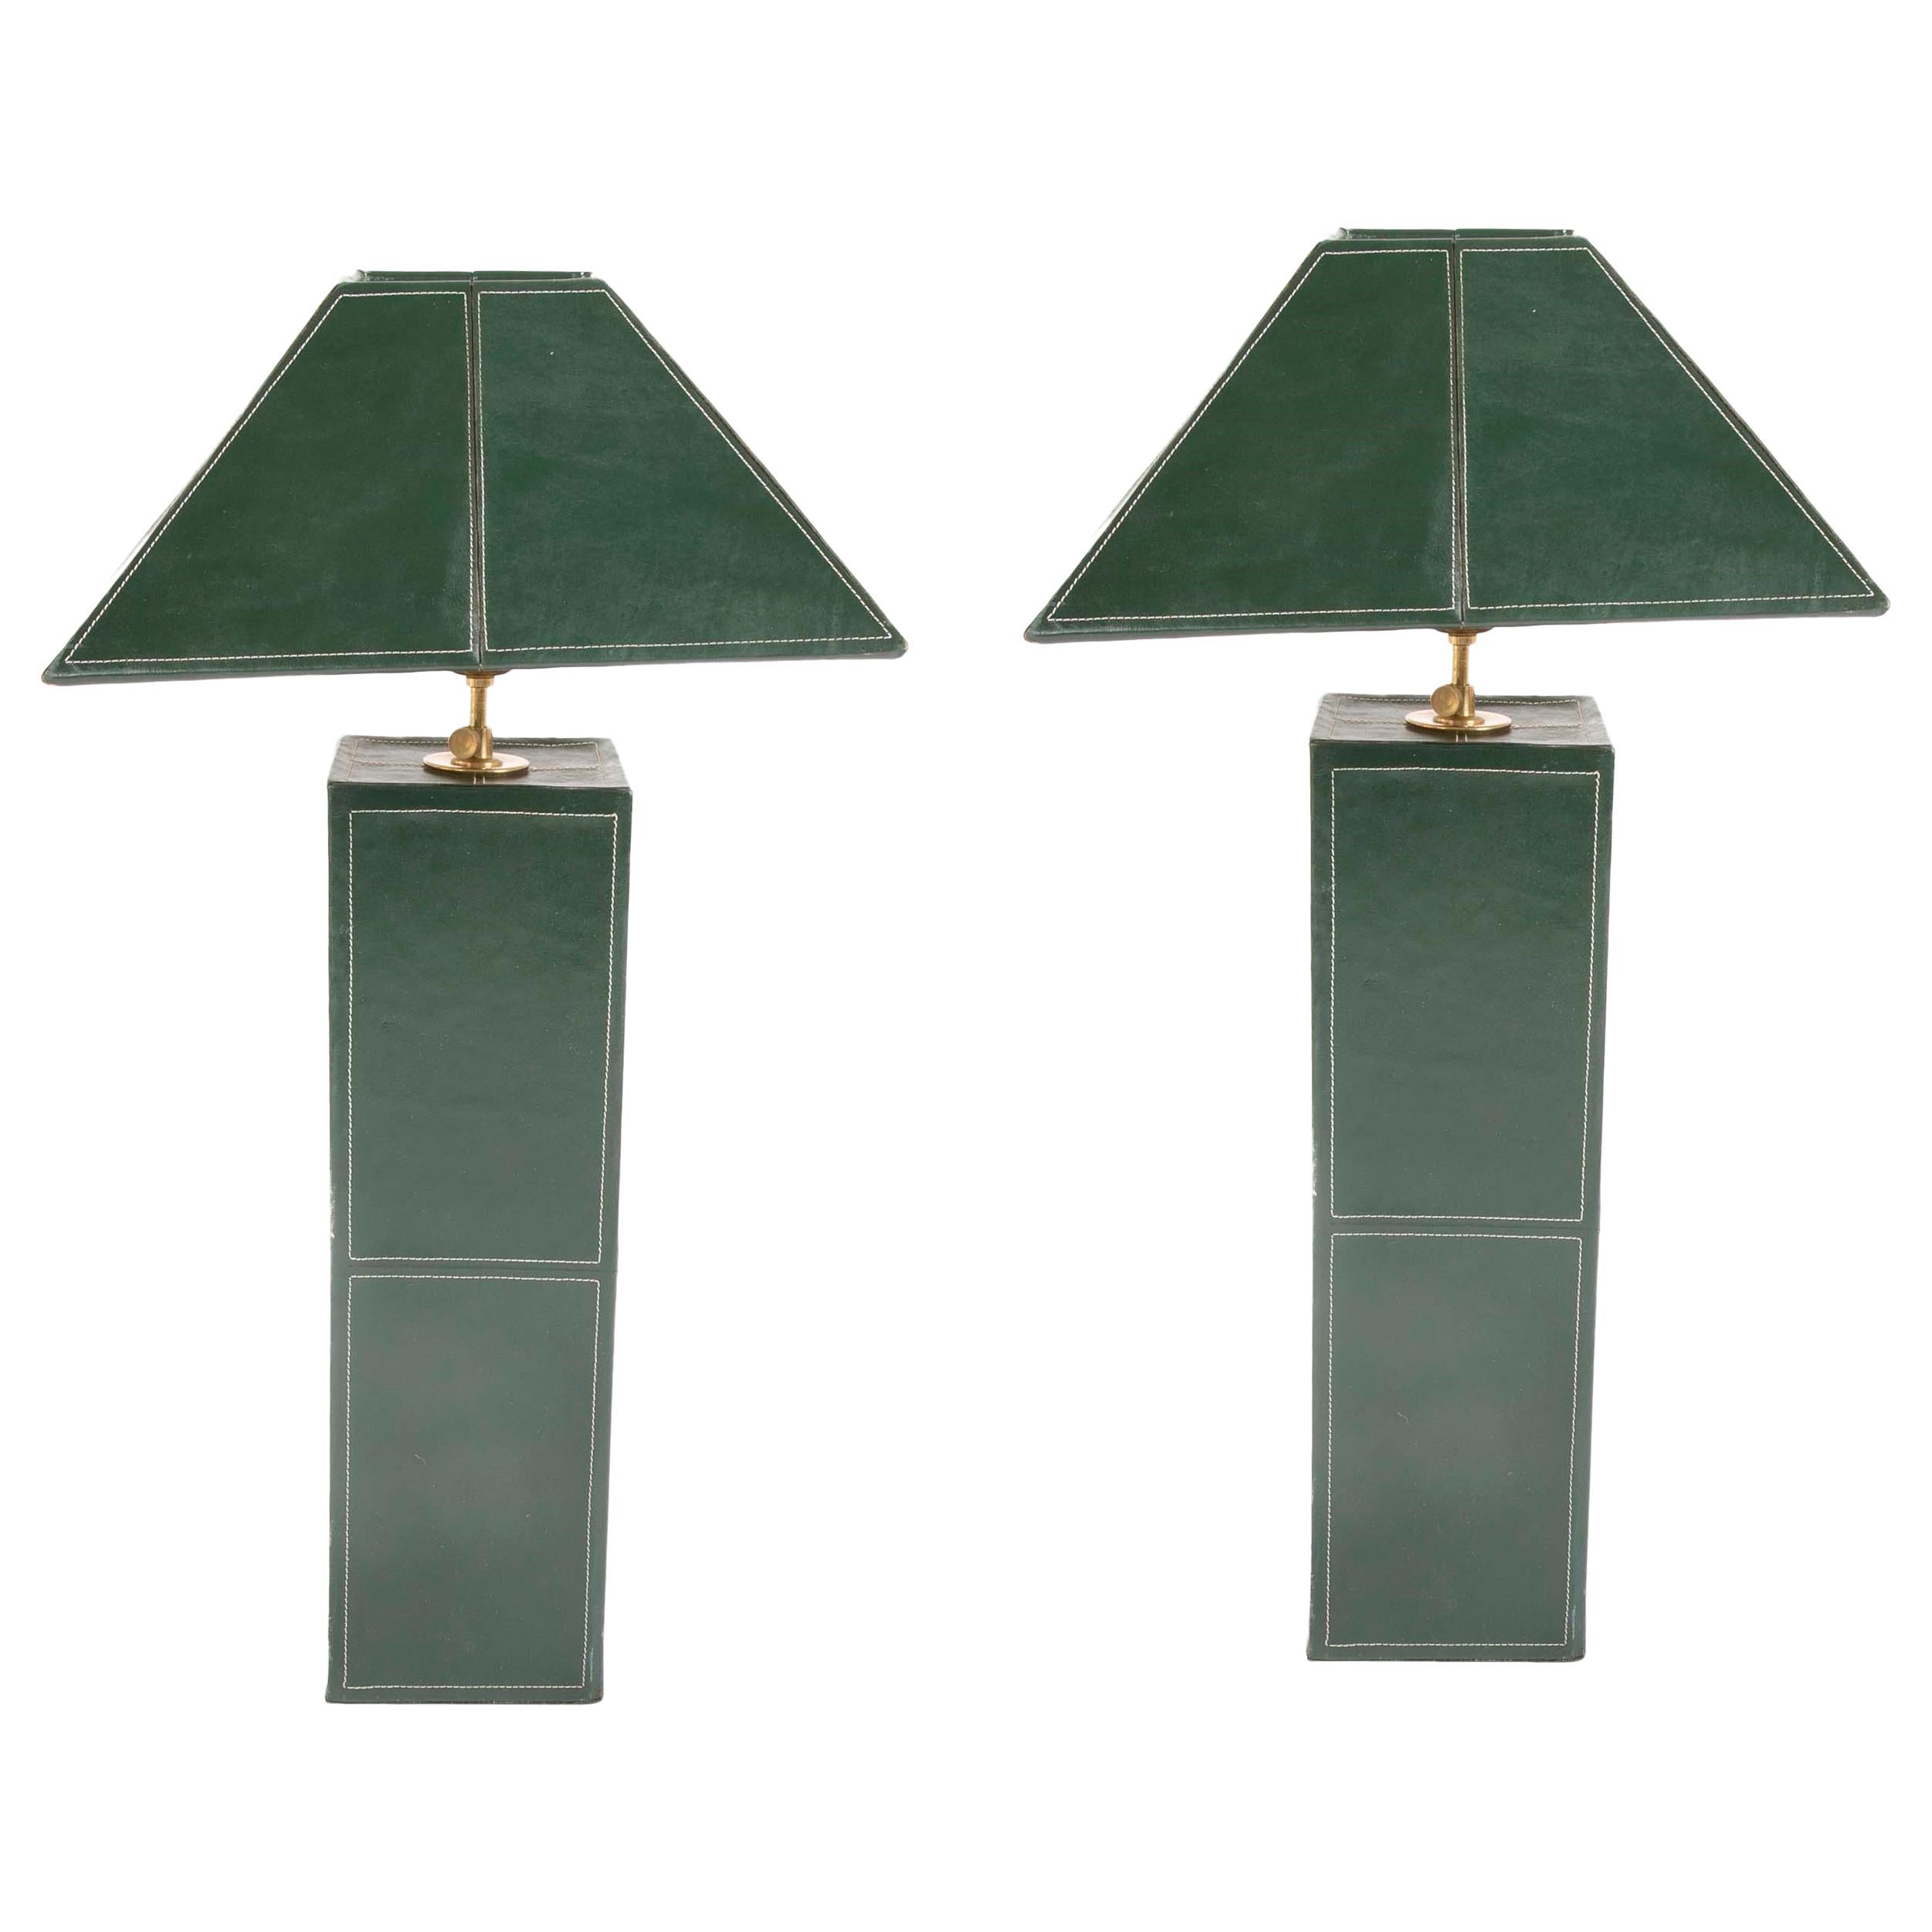 Pair of Leather Covered Lamps in the Manner of Jacques Adnet